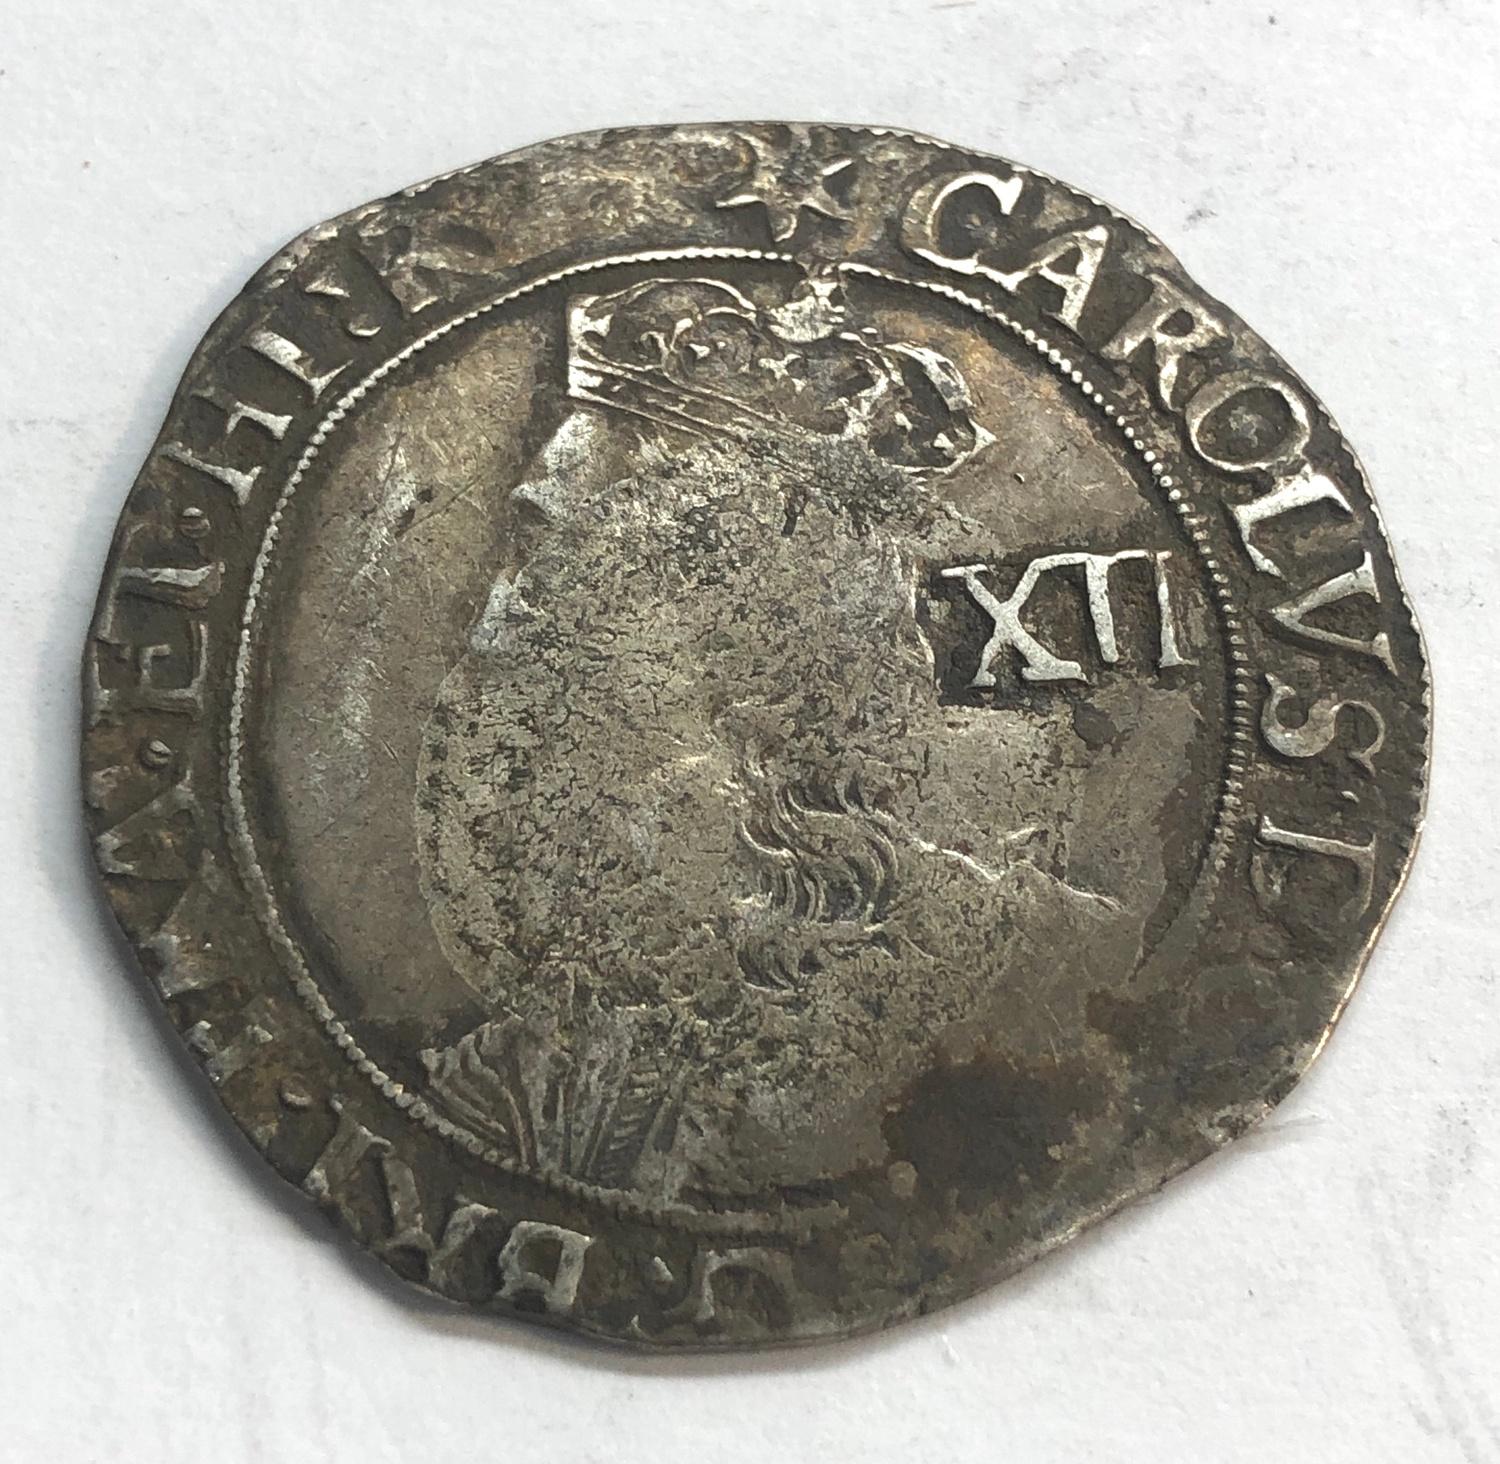 Charles 1st 1625-49 silver coin measures approx 30mm dia weight 6.1g please see images for grade and